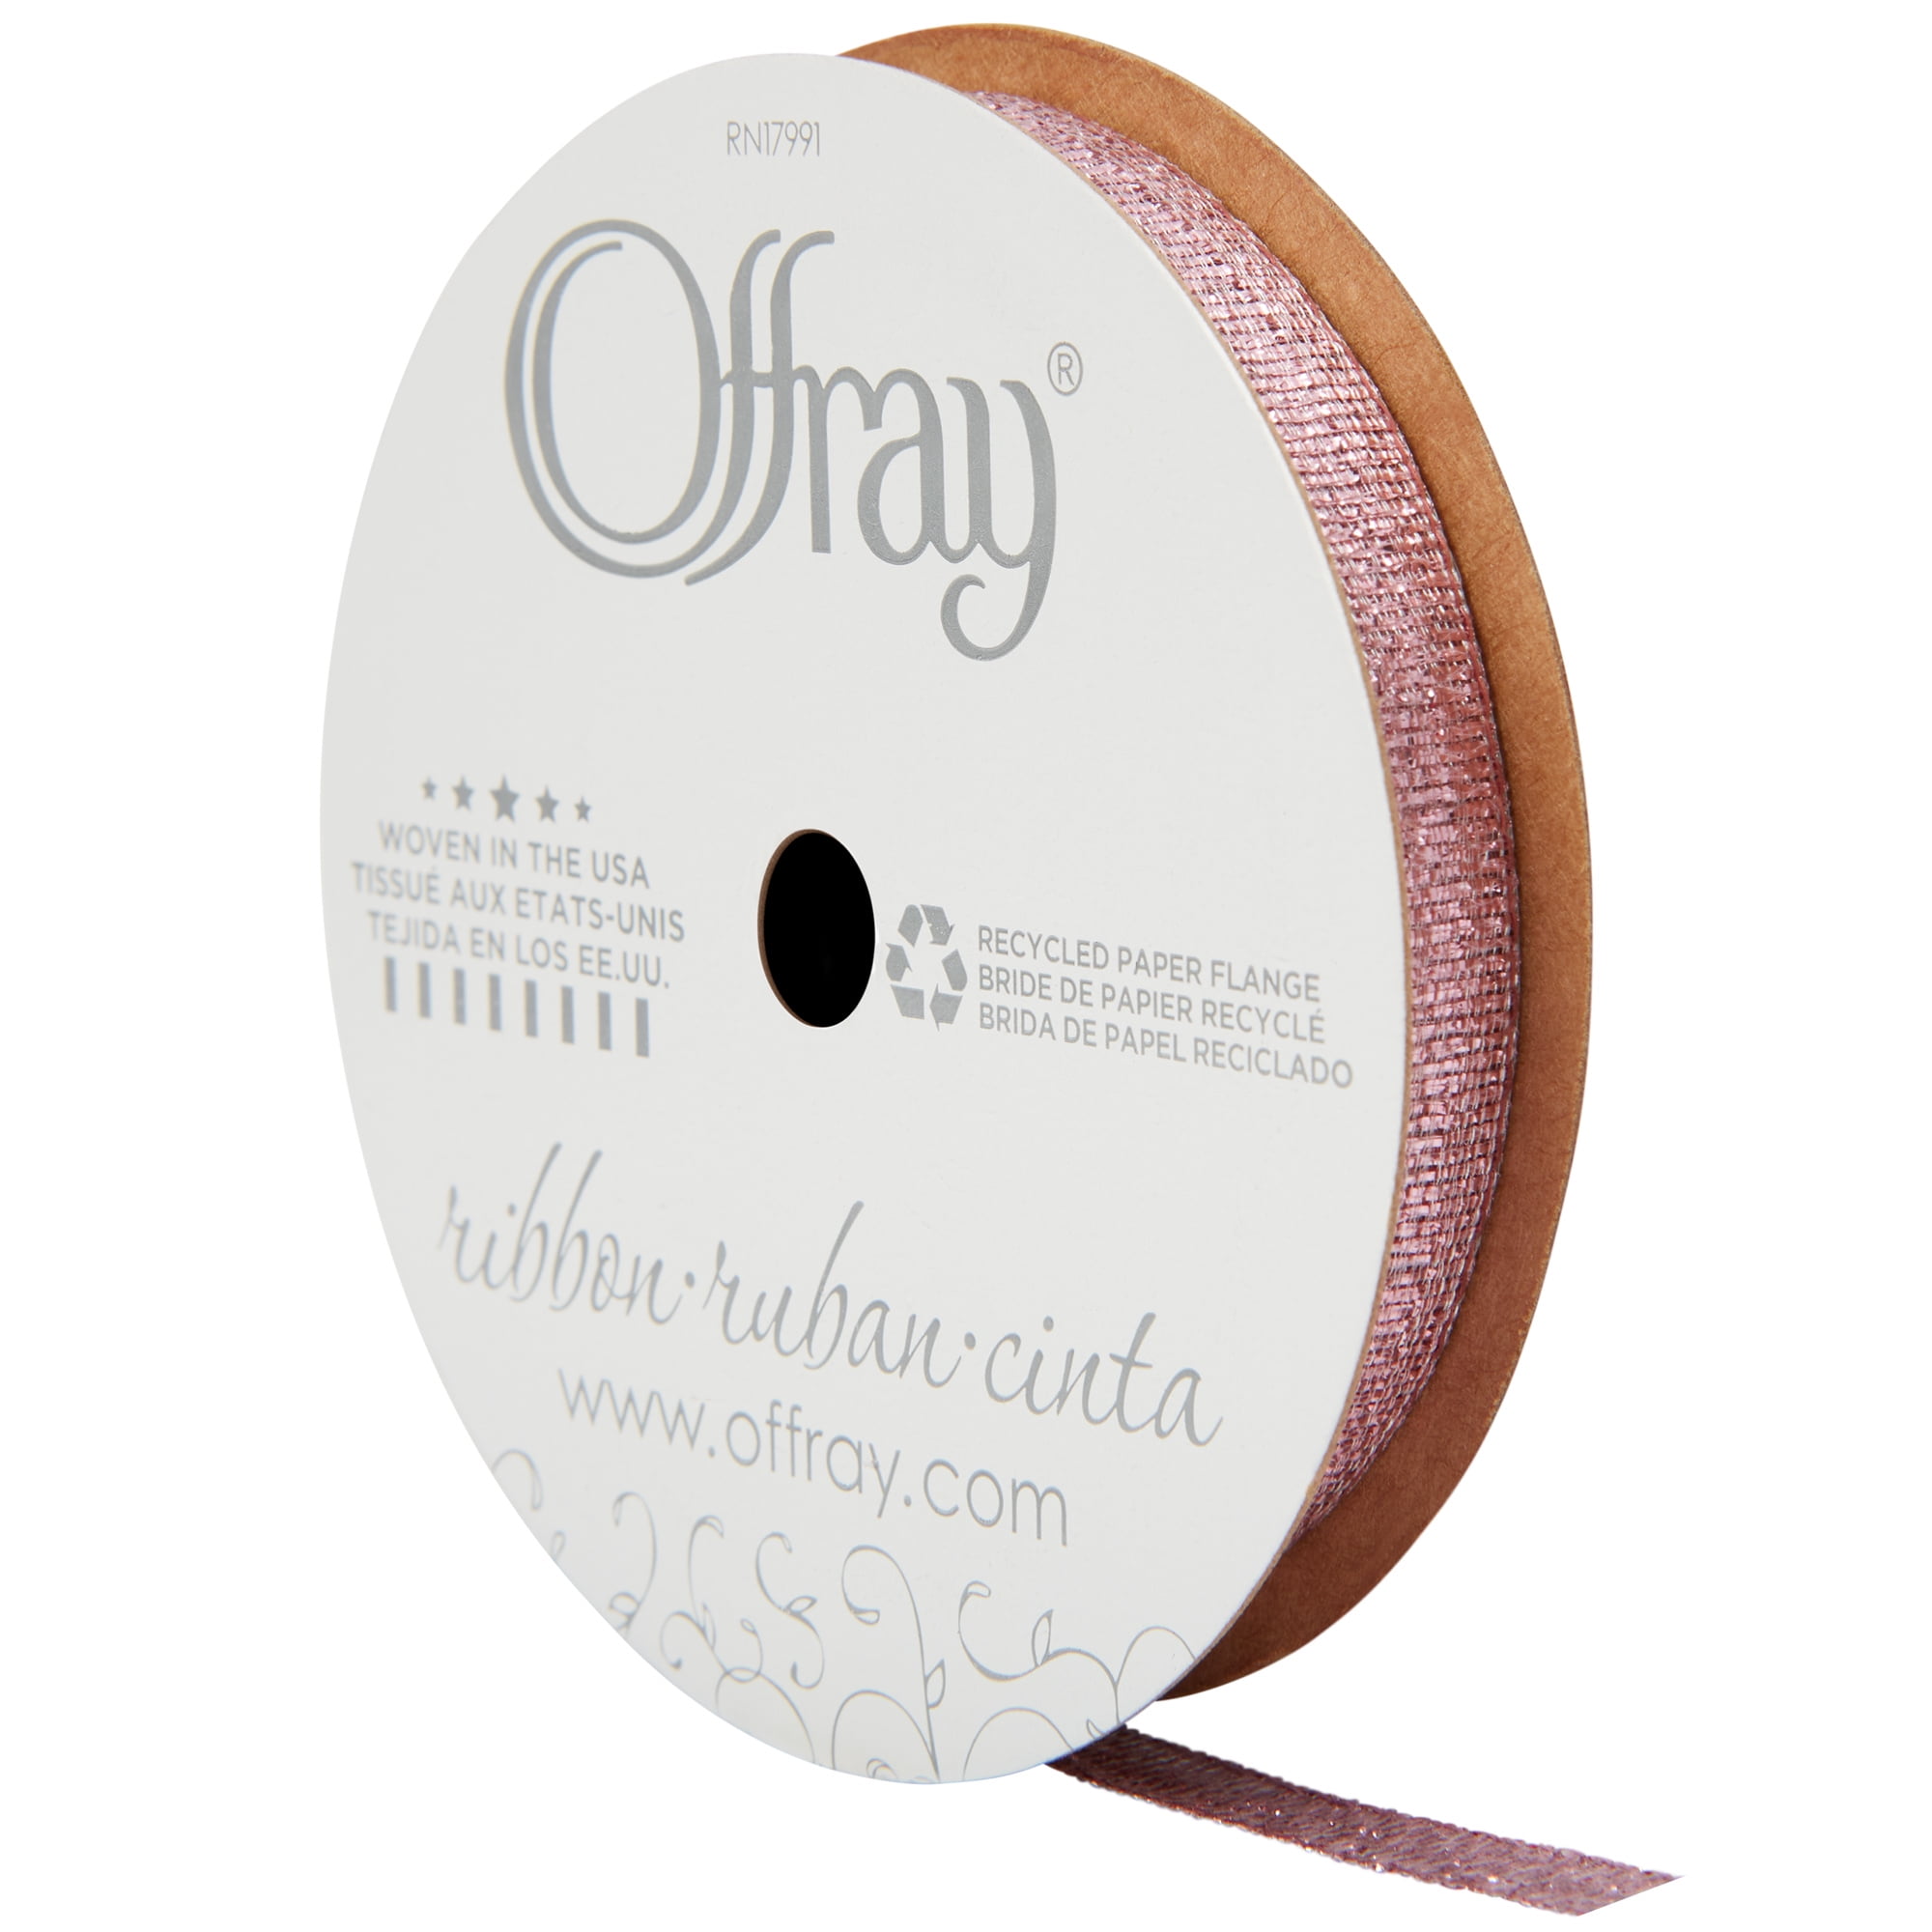 Offray Ribbon, Light Pink 3/8 inch Galena Metallic Ribbon for Wedding, Crafts, and Gifting, 9 feet, 1 Each